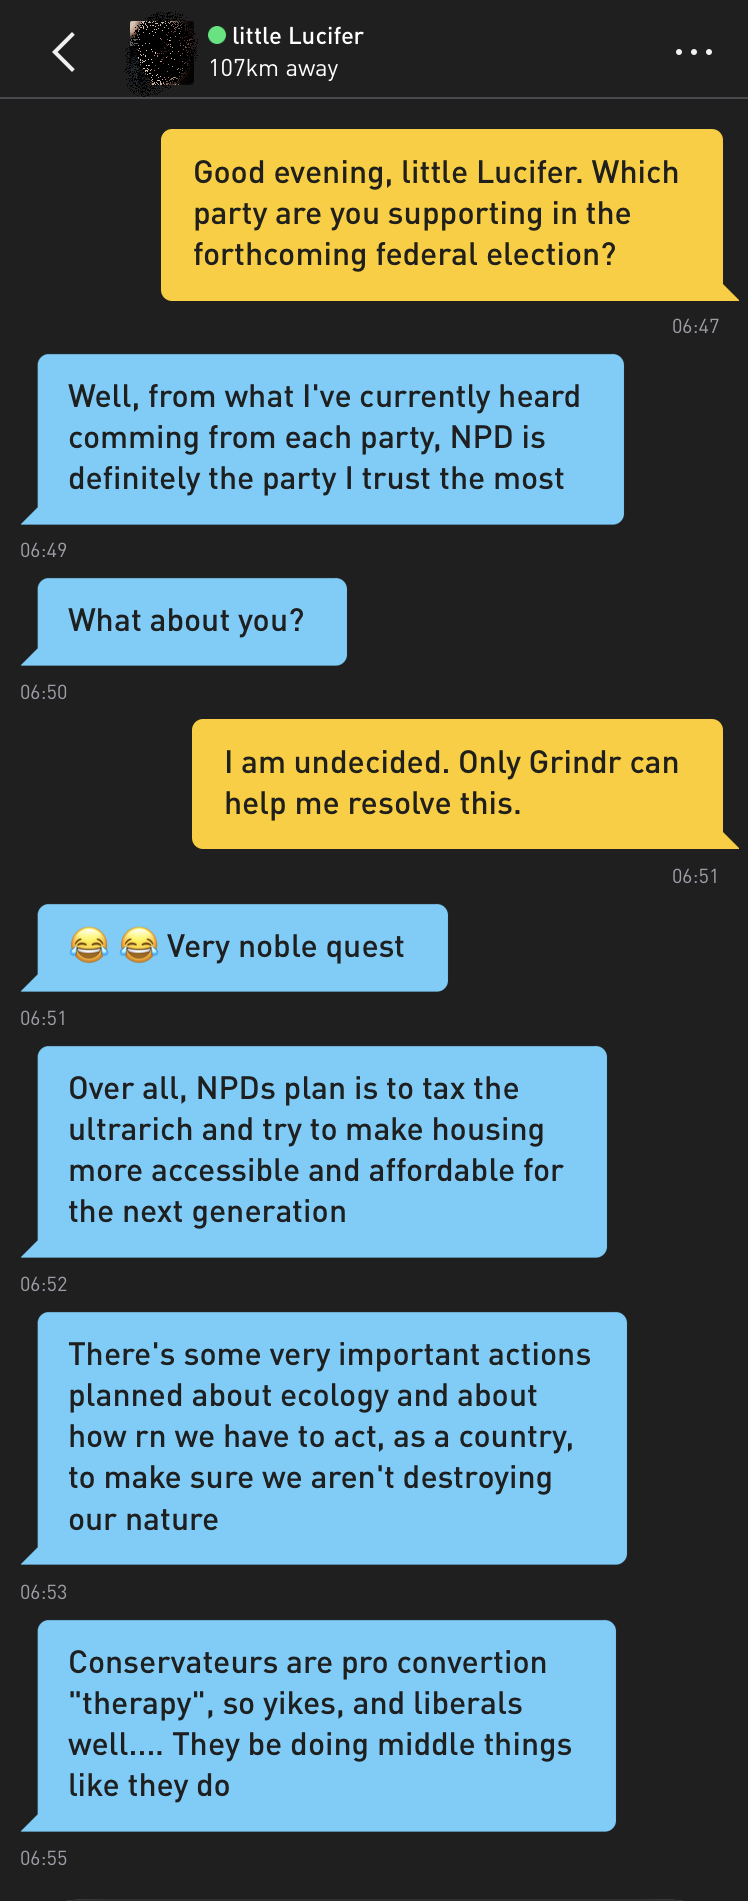 Me: Good evening, little Lucifer. Which party are you supporting in the forthcoming federal election? little Lucifer: Well, from what I've currently heard comming from each party, NPD is definitely the party I trust the most little Lucifer: What about you? Me: I am undecided. Only Grindr can help me resolve this. little Lucifer: ?? Very noble quest little Lucifer: Over all, NPDs plan is to tax the ultrarich and try to make housing more accessible and affordable for the next generation little Lucifer: There's some very important actions planned about ecology and about how rn we have to act, as a country, to make sure we aren't destroying our nature little Lucifer: Conservateurs are pro convertion "therapy", so yikes, and liberals well.... They be doing middle things like they do